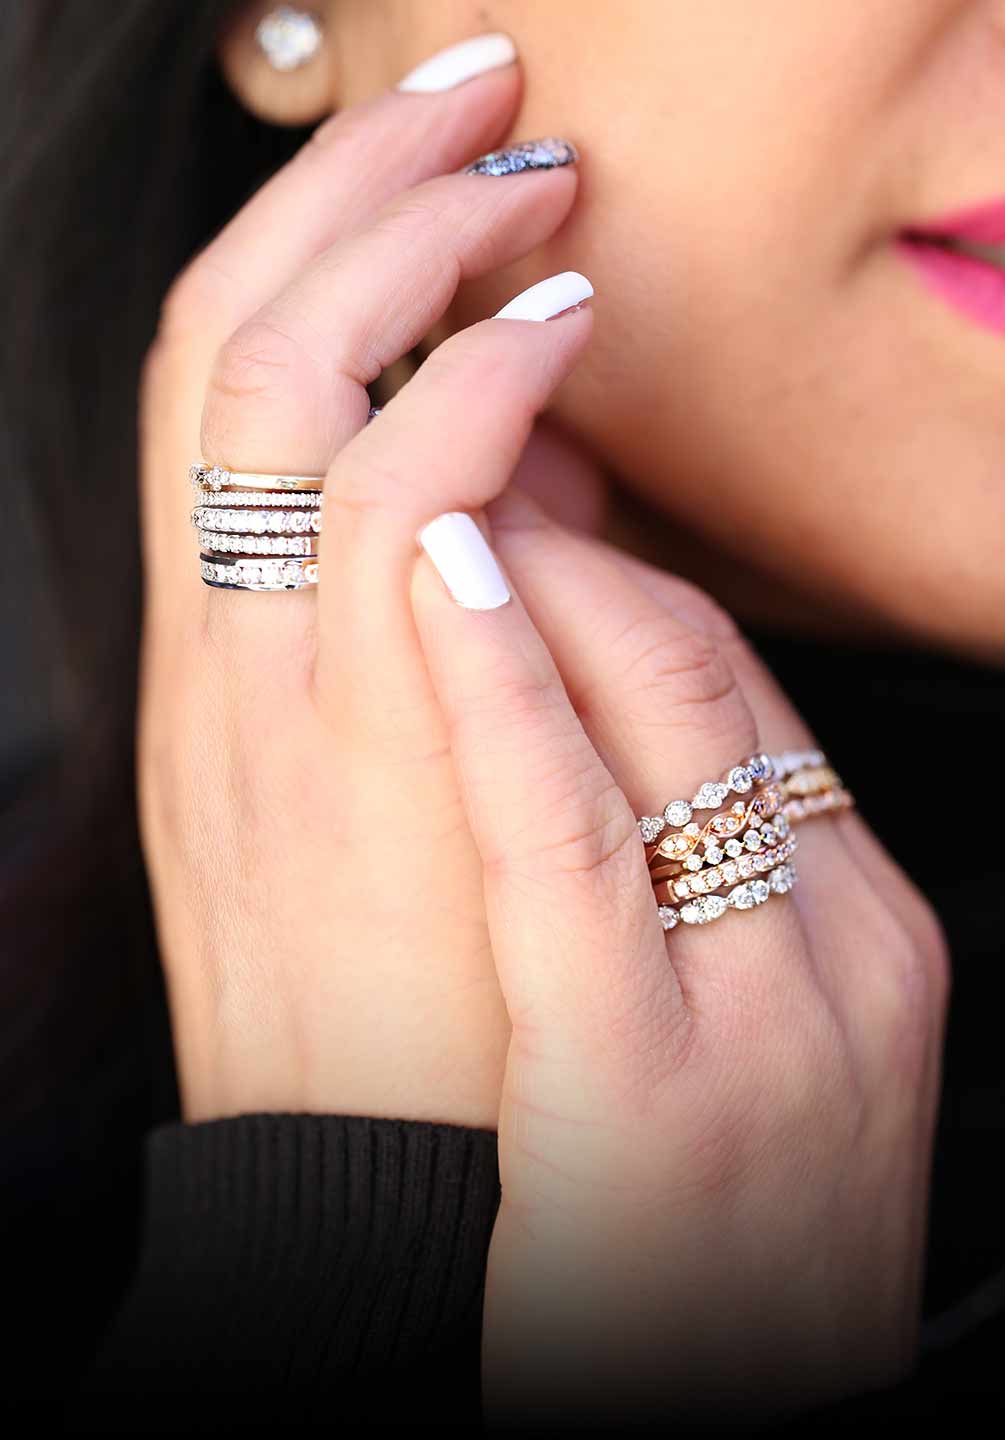 Woman with hands near face wearing stacked up diamond wedding bands in 14 karat white, yellow and rose gold